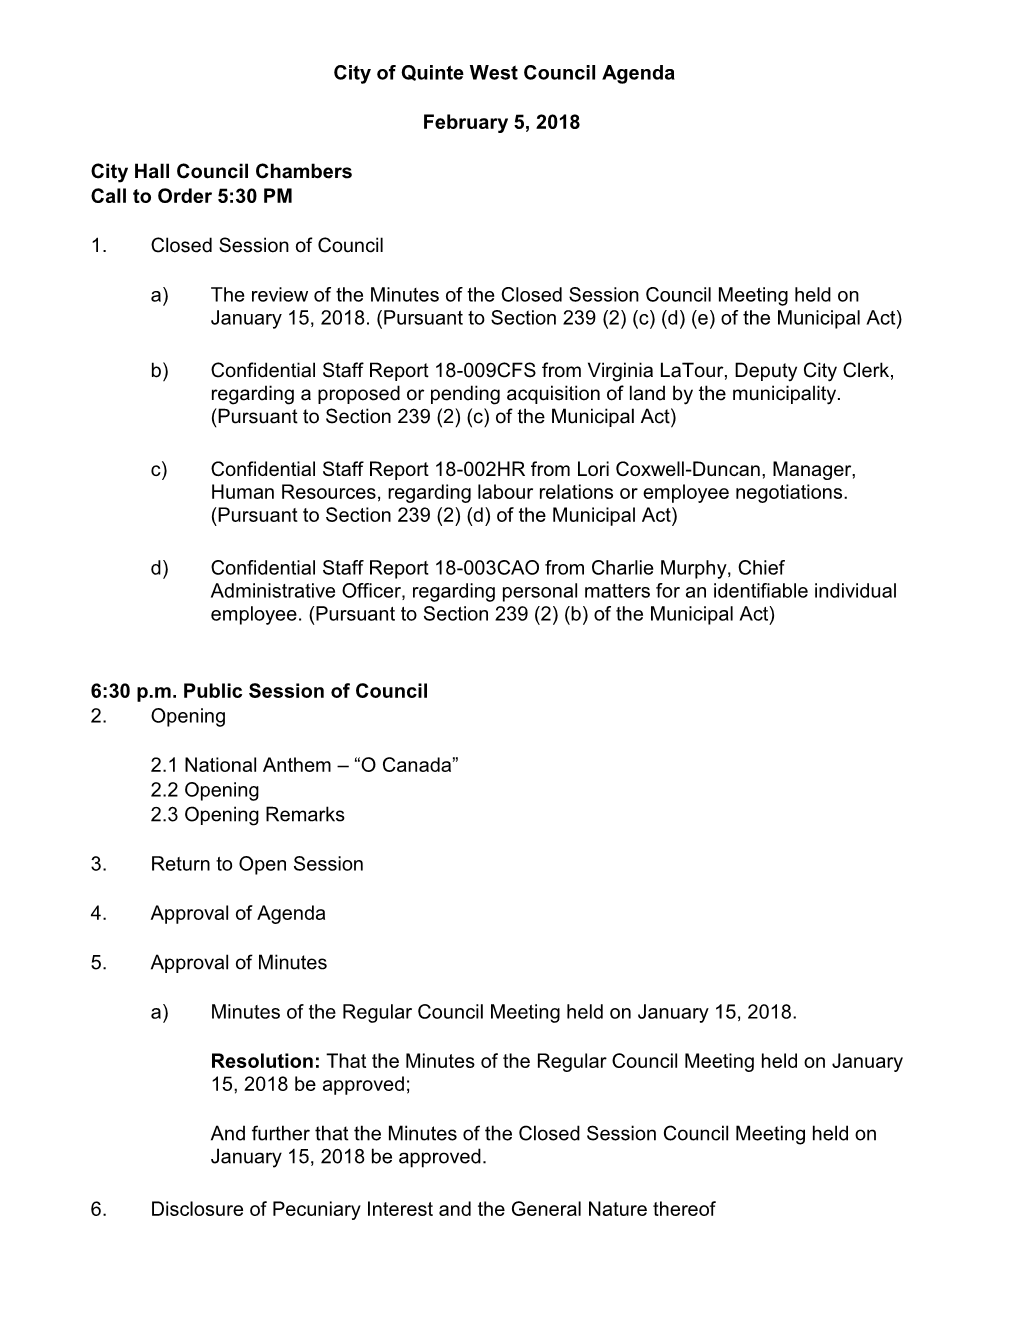 City of Quinte West Council Agenda February 5, 2018 City Hall Council Chambers Call to Order 5:30 PM 1. Closed Session of Counci